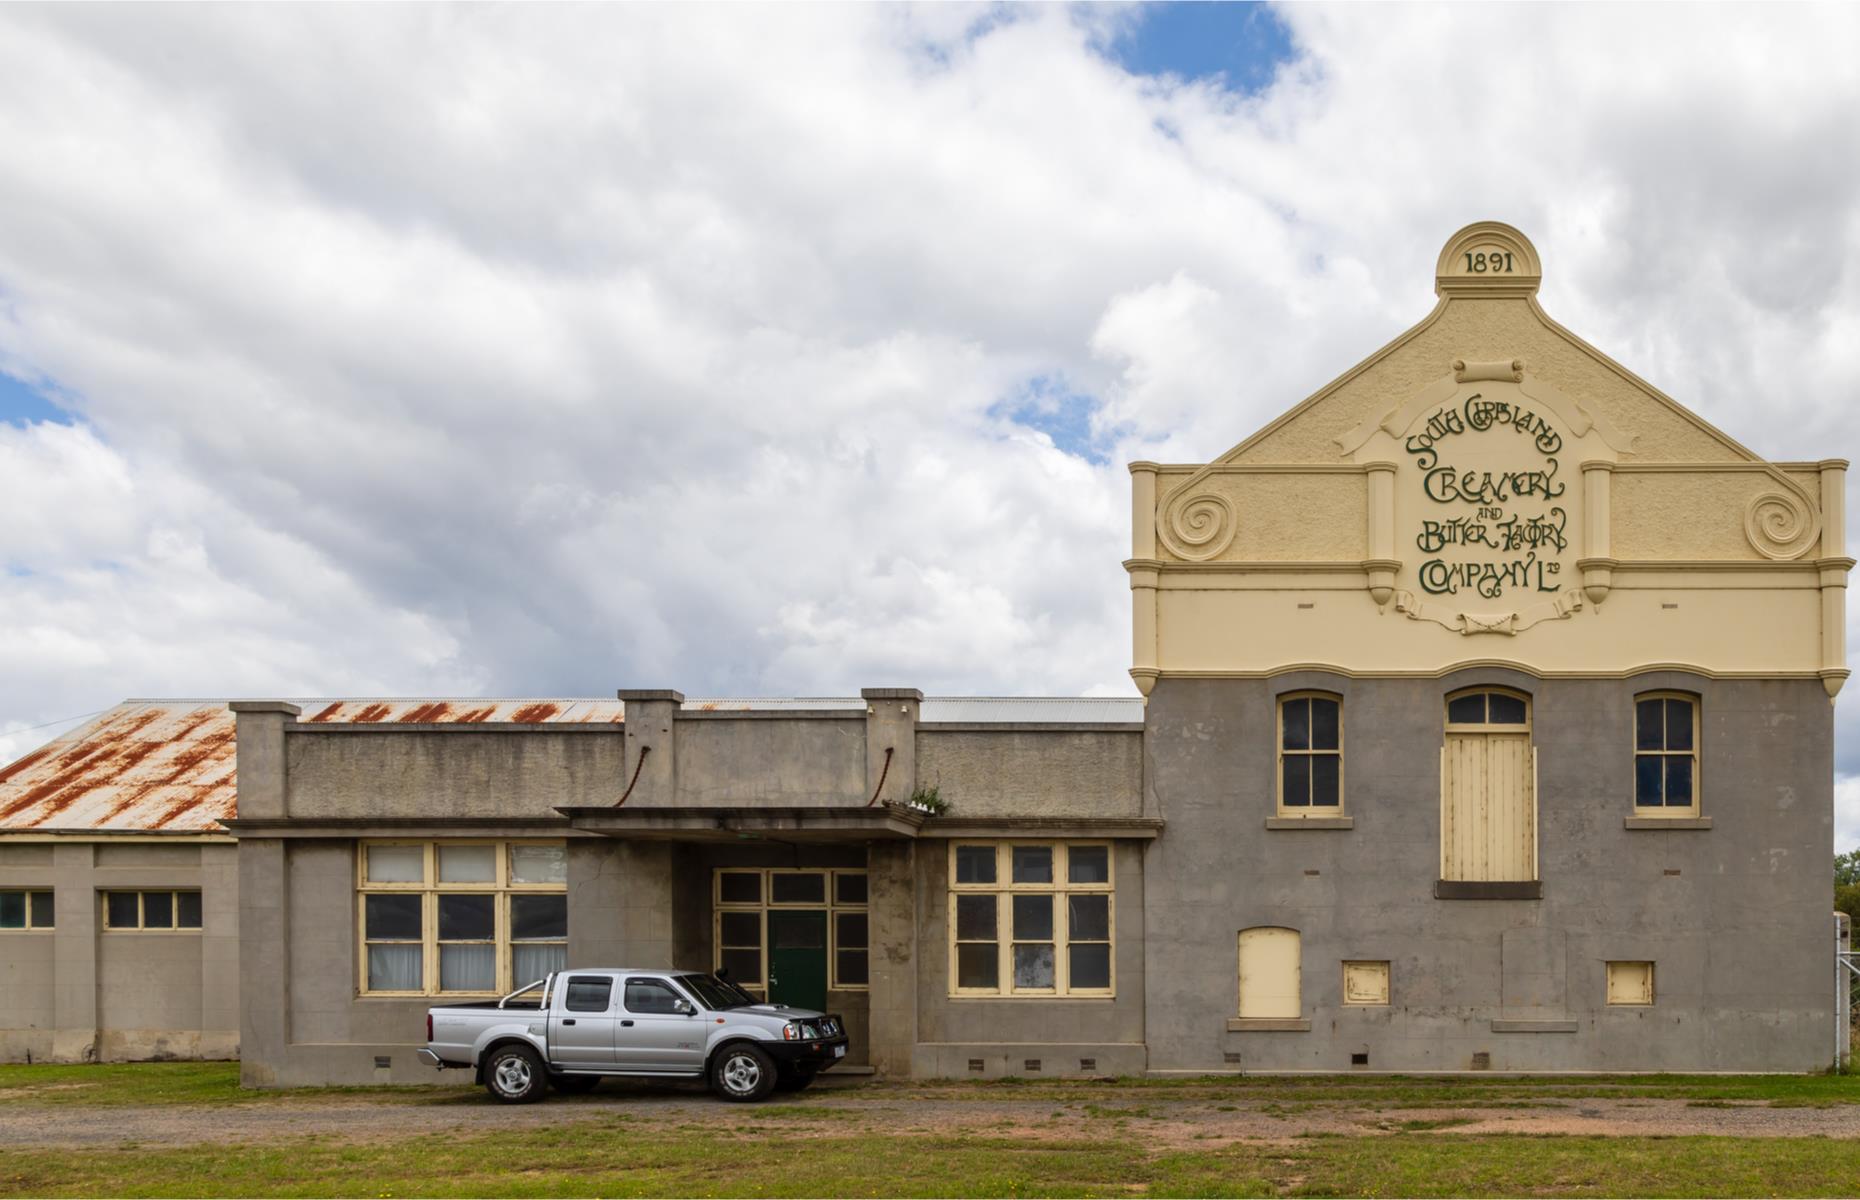 Standing at the entrance to agricultural township Yarram in Victoria, this former butter factory was opened in 1891 and closed in 1987. It had a good innings, but now the handsome heritage-listed building is shuttered up and empty. After a good snoop around from the outside, head in to discover the town’s past at the Historical Society's Museum next door.